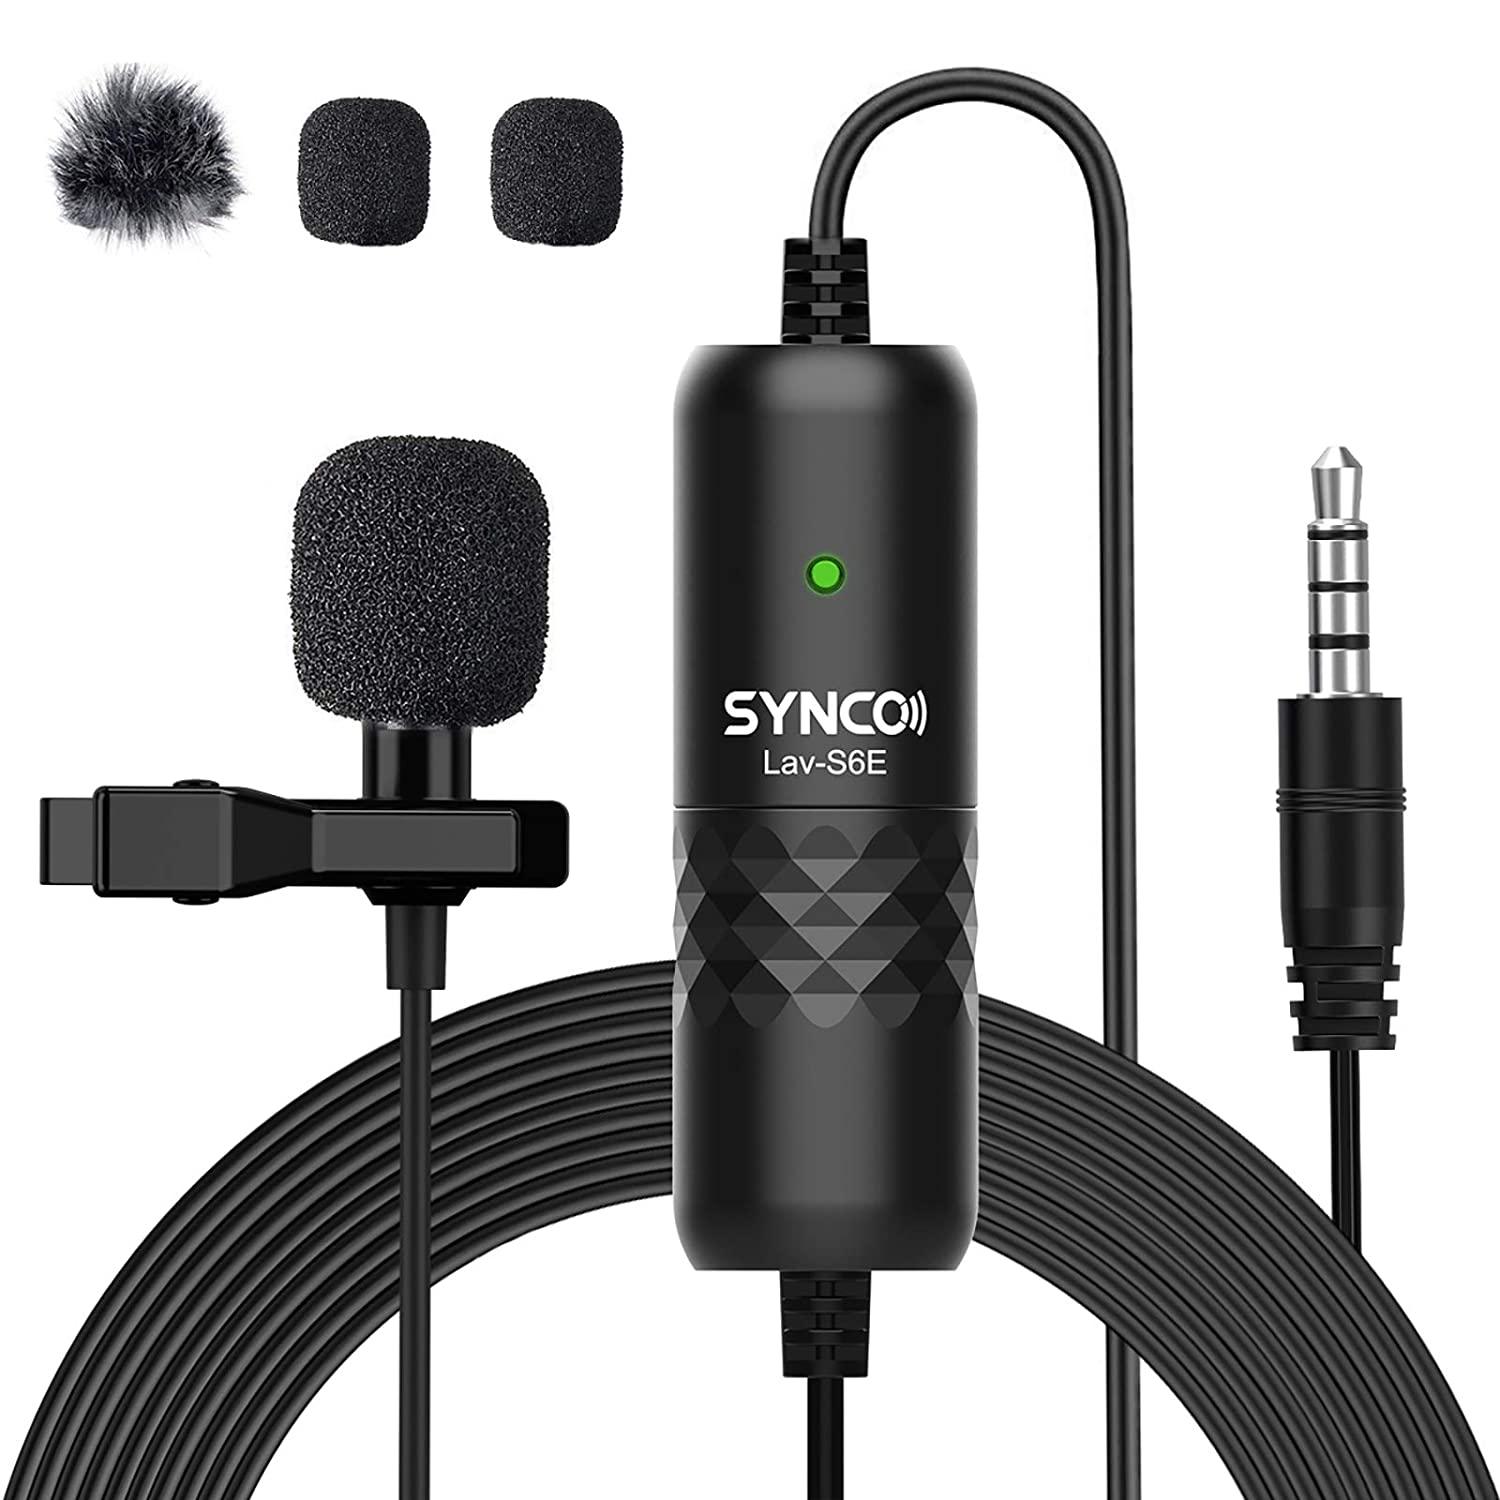 SYNCO-(Lav-S6E)-Lavalier Omnidirectional Condenser Label Mic, 6M Cord iPhone Android Smartphone PC Laptop Camera for Broadcast Interview YouTube Video Recording, [Official] Clip-on-Lavalier-Microphone. - Digitek